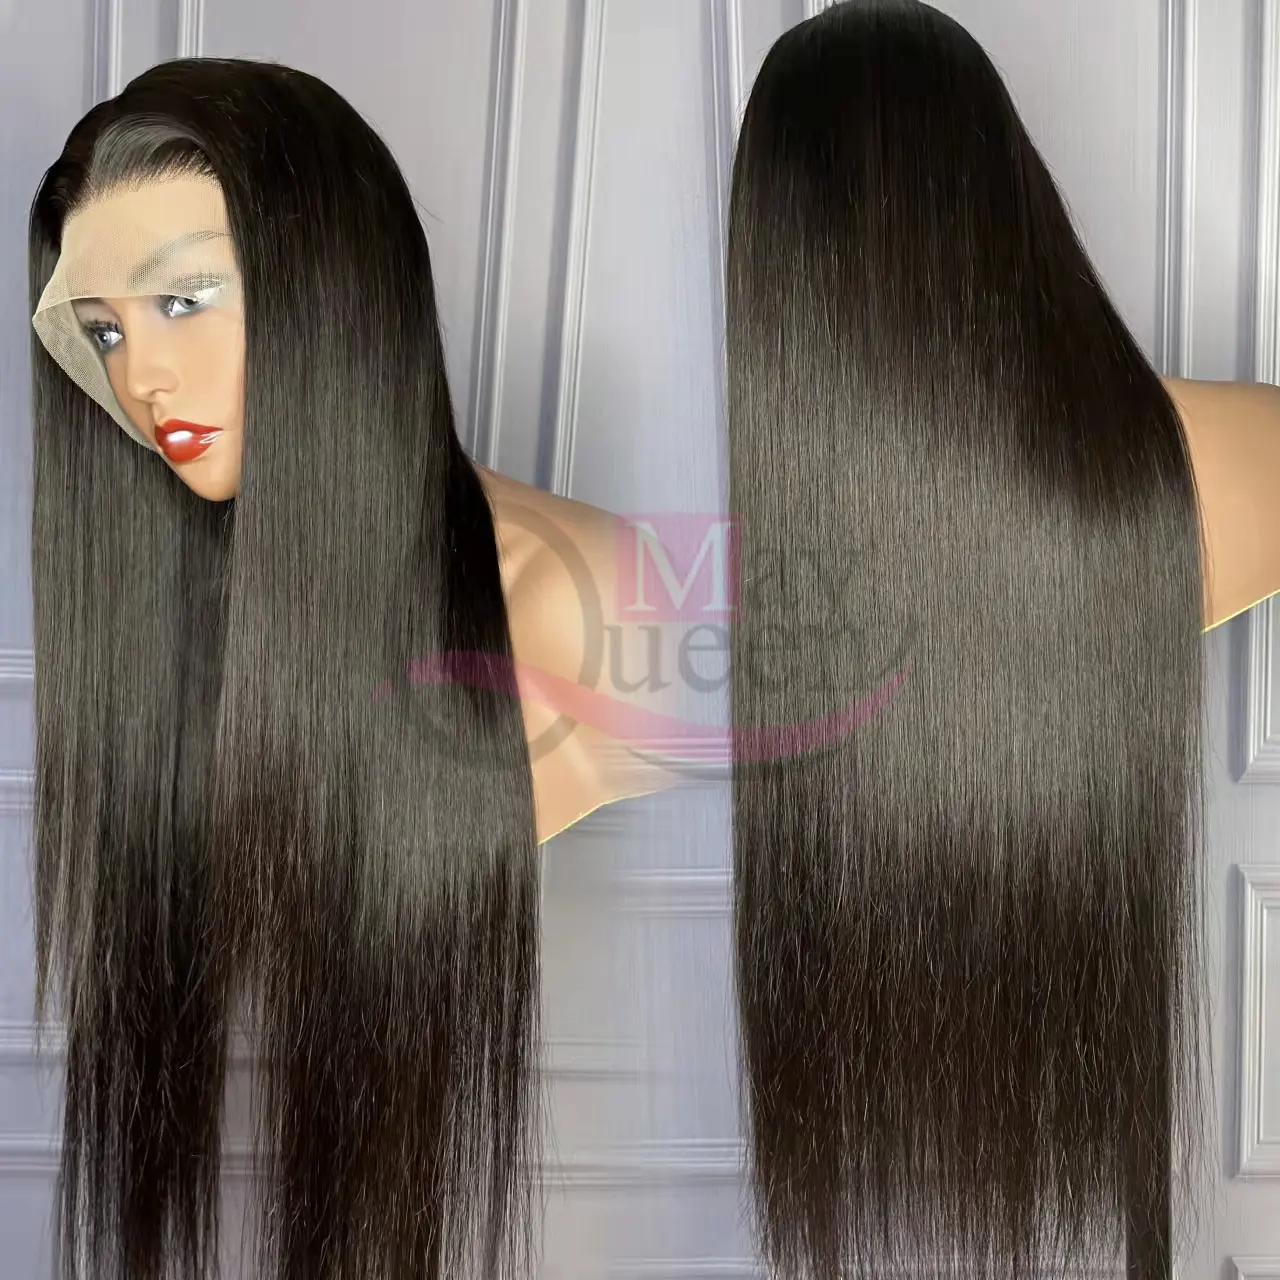 Mayqueen Wholesale Transparent HD Lace Silky Straight Human Hair Lace Frontal Wigs For Black Women Brazilian Hair Lace wig